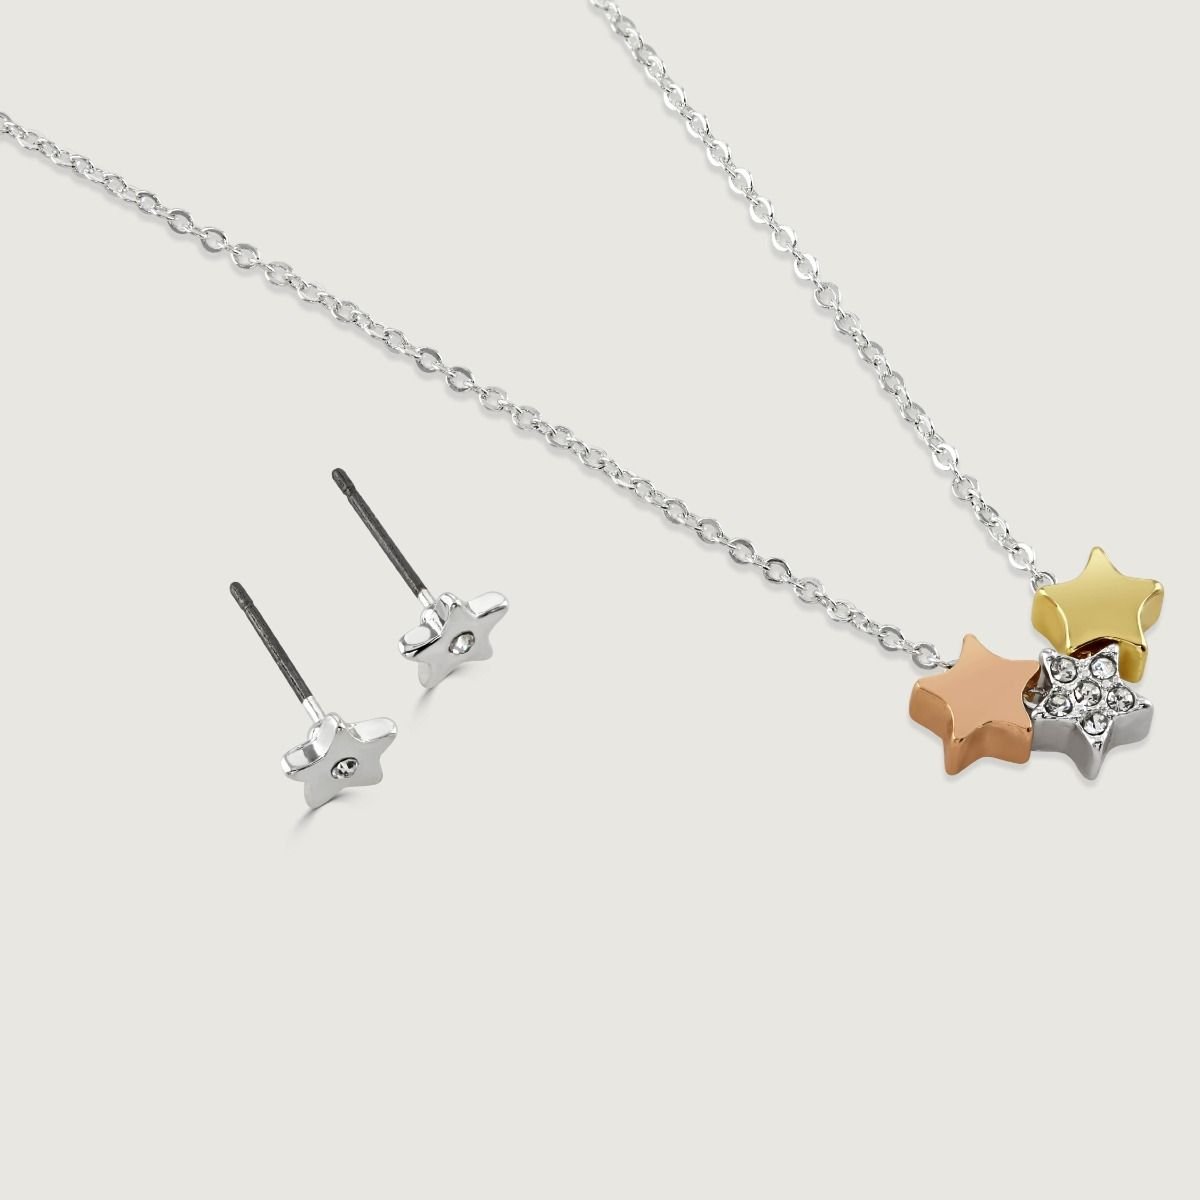 The Starburst pendant and earring set features delicate stars in silver plate, rose gold and gold tones with exquisite crystal detailing. Three stars are suspended from a silver-plated chain and paired with silver plated stud earrings, making this the per